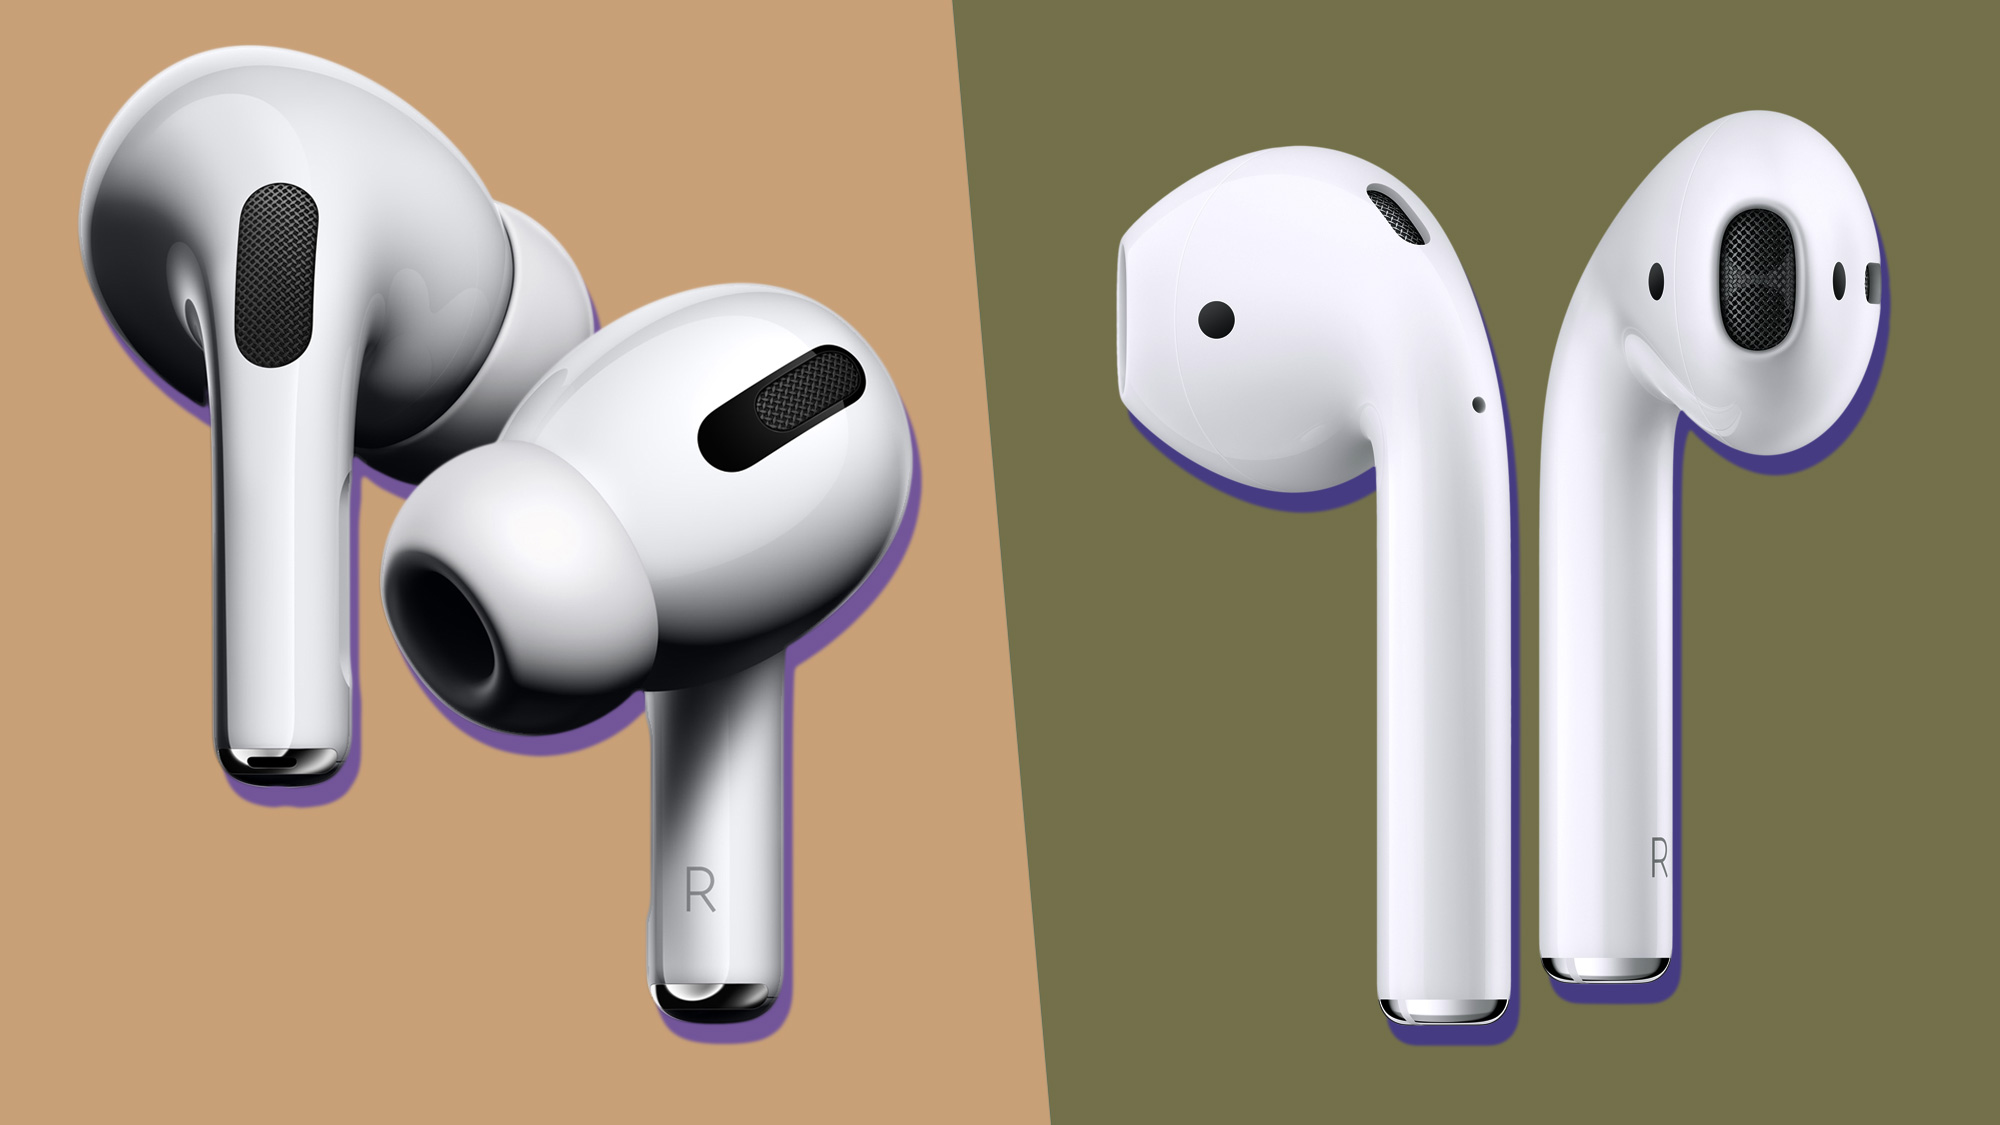 Apple (2019) vs AirPods Pro which wireless earbuds are better? |